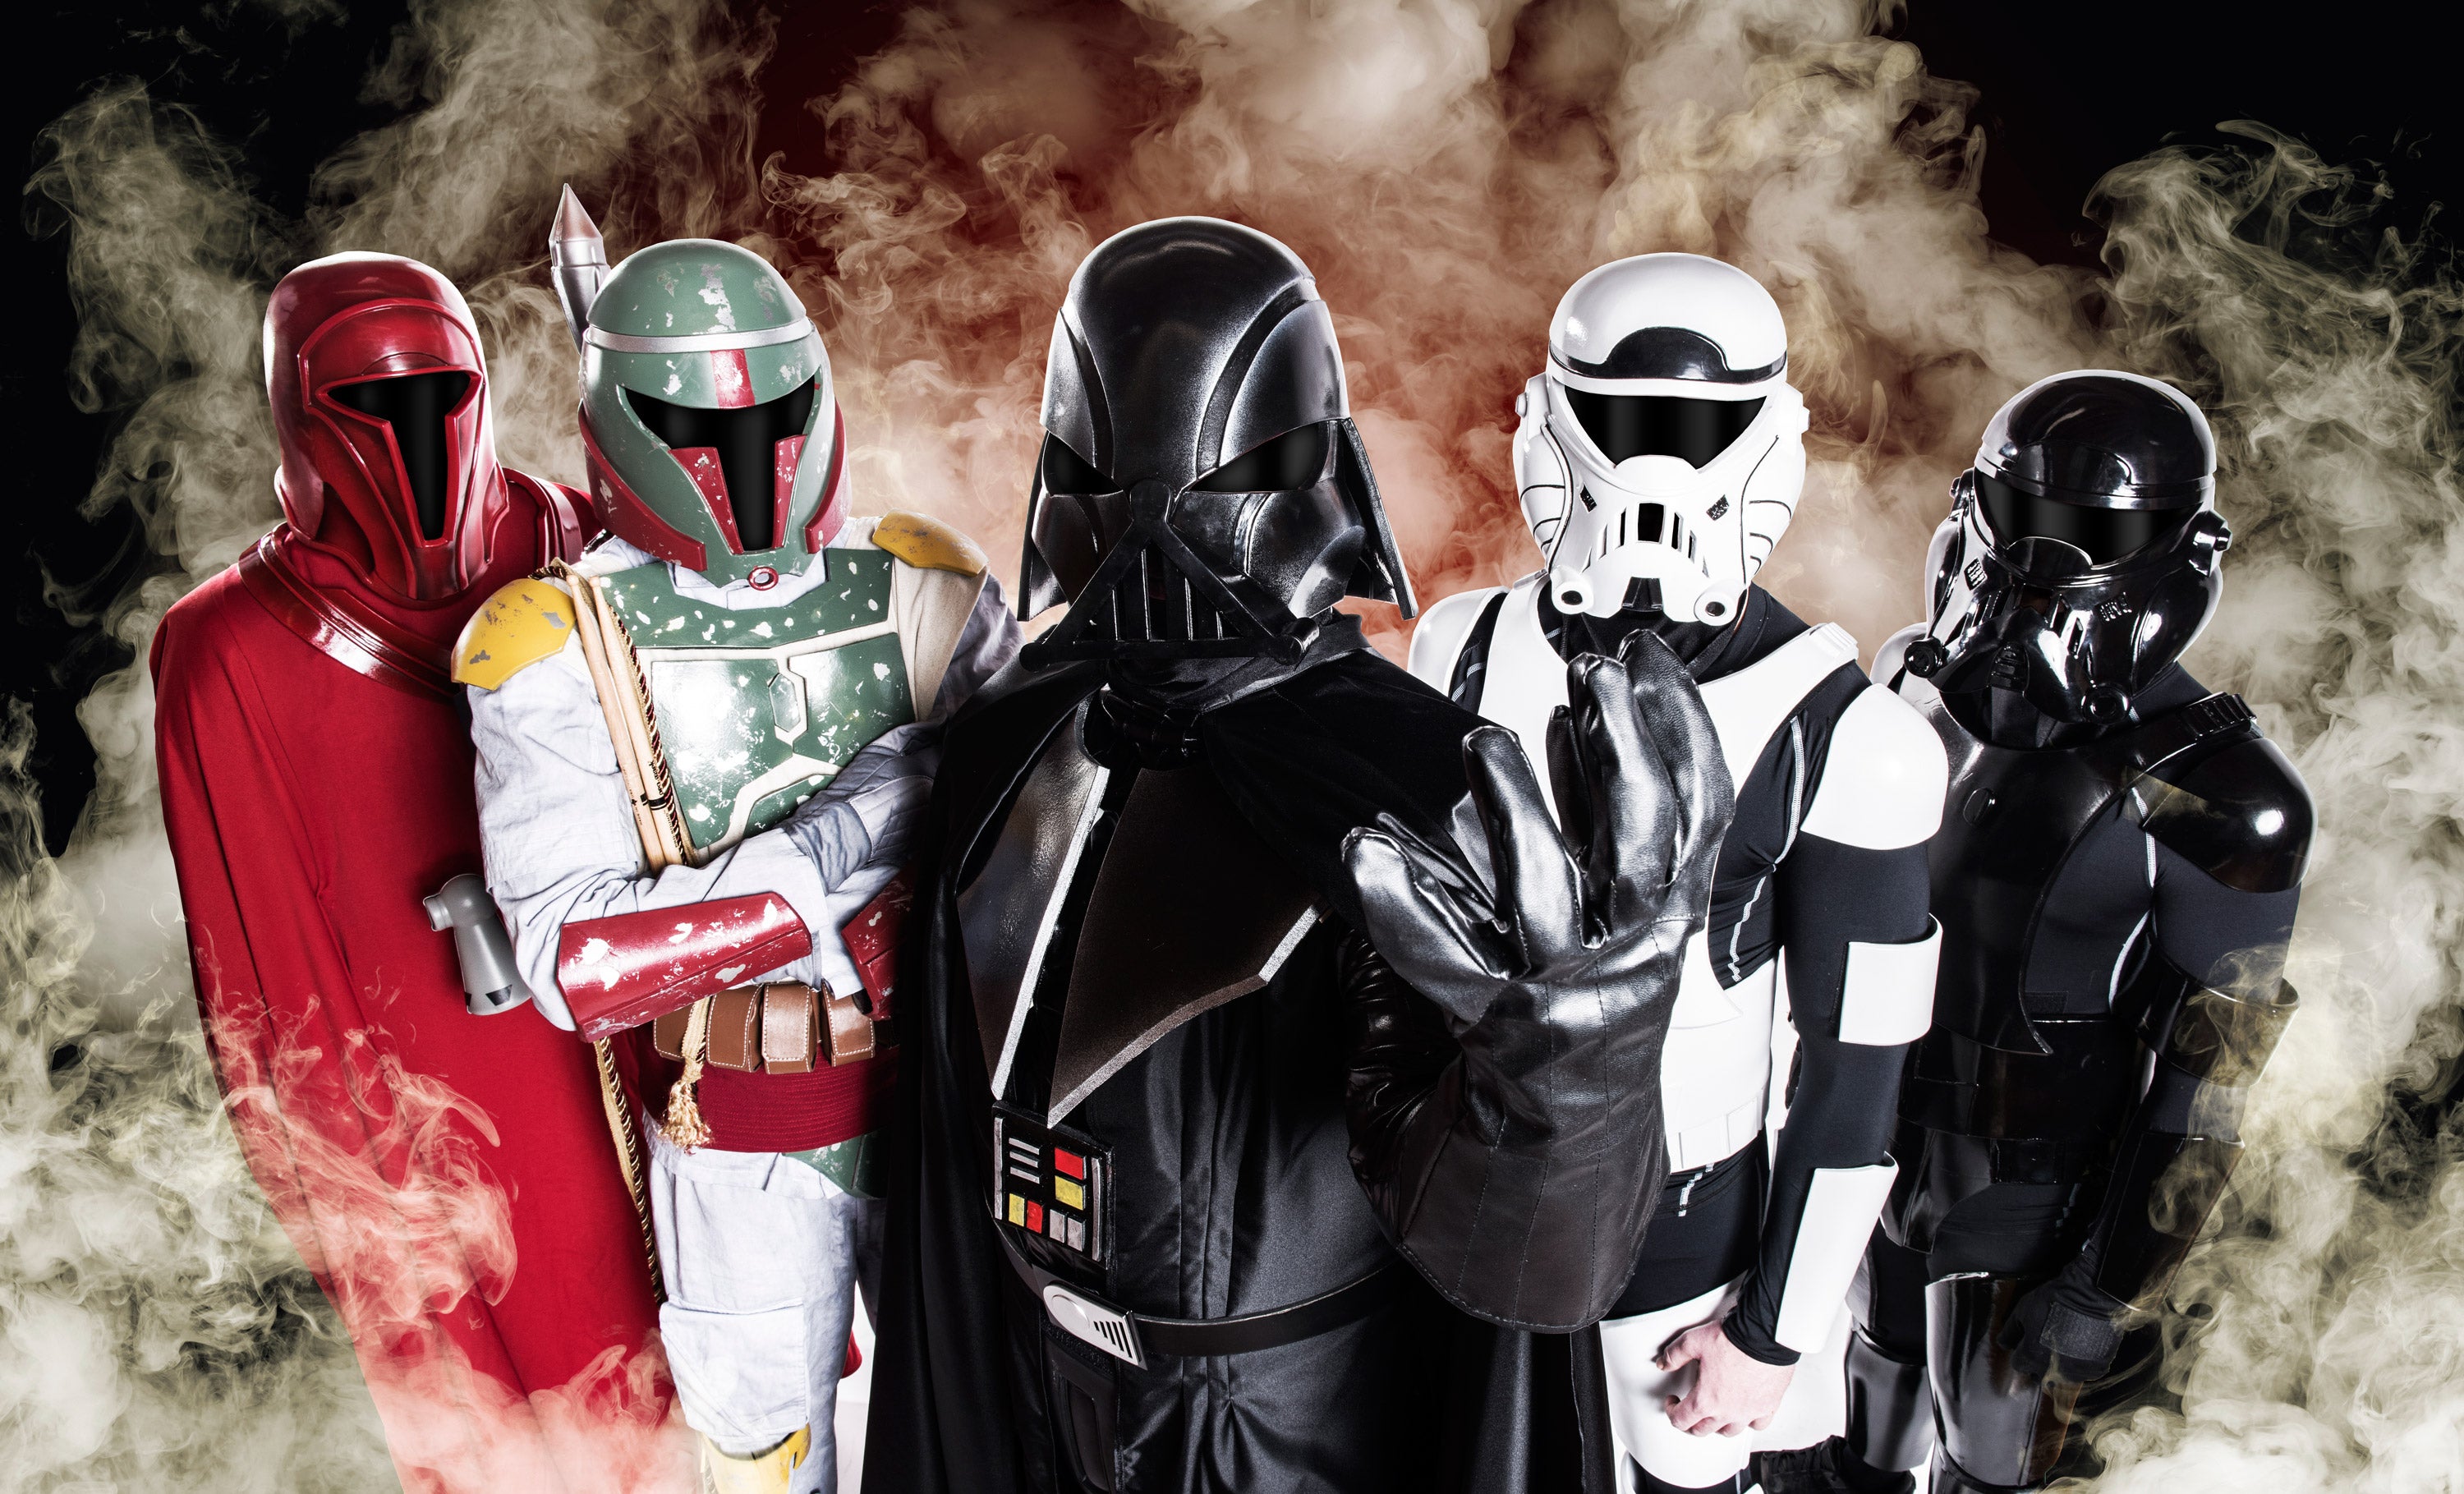 Galactic Empire with special guests at Brick by Brick